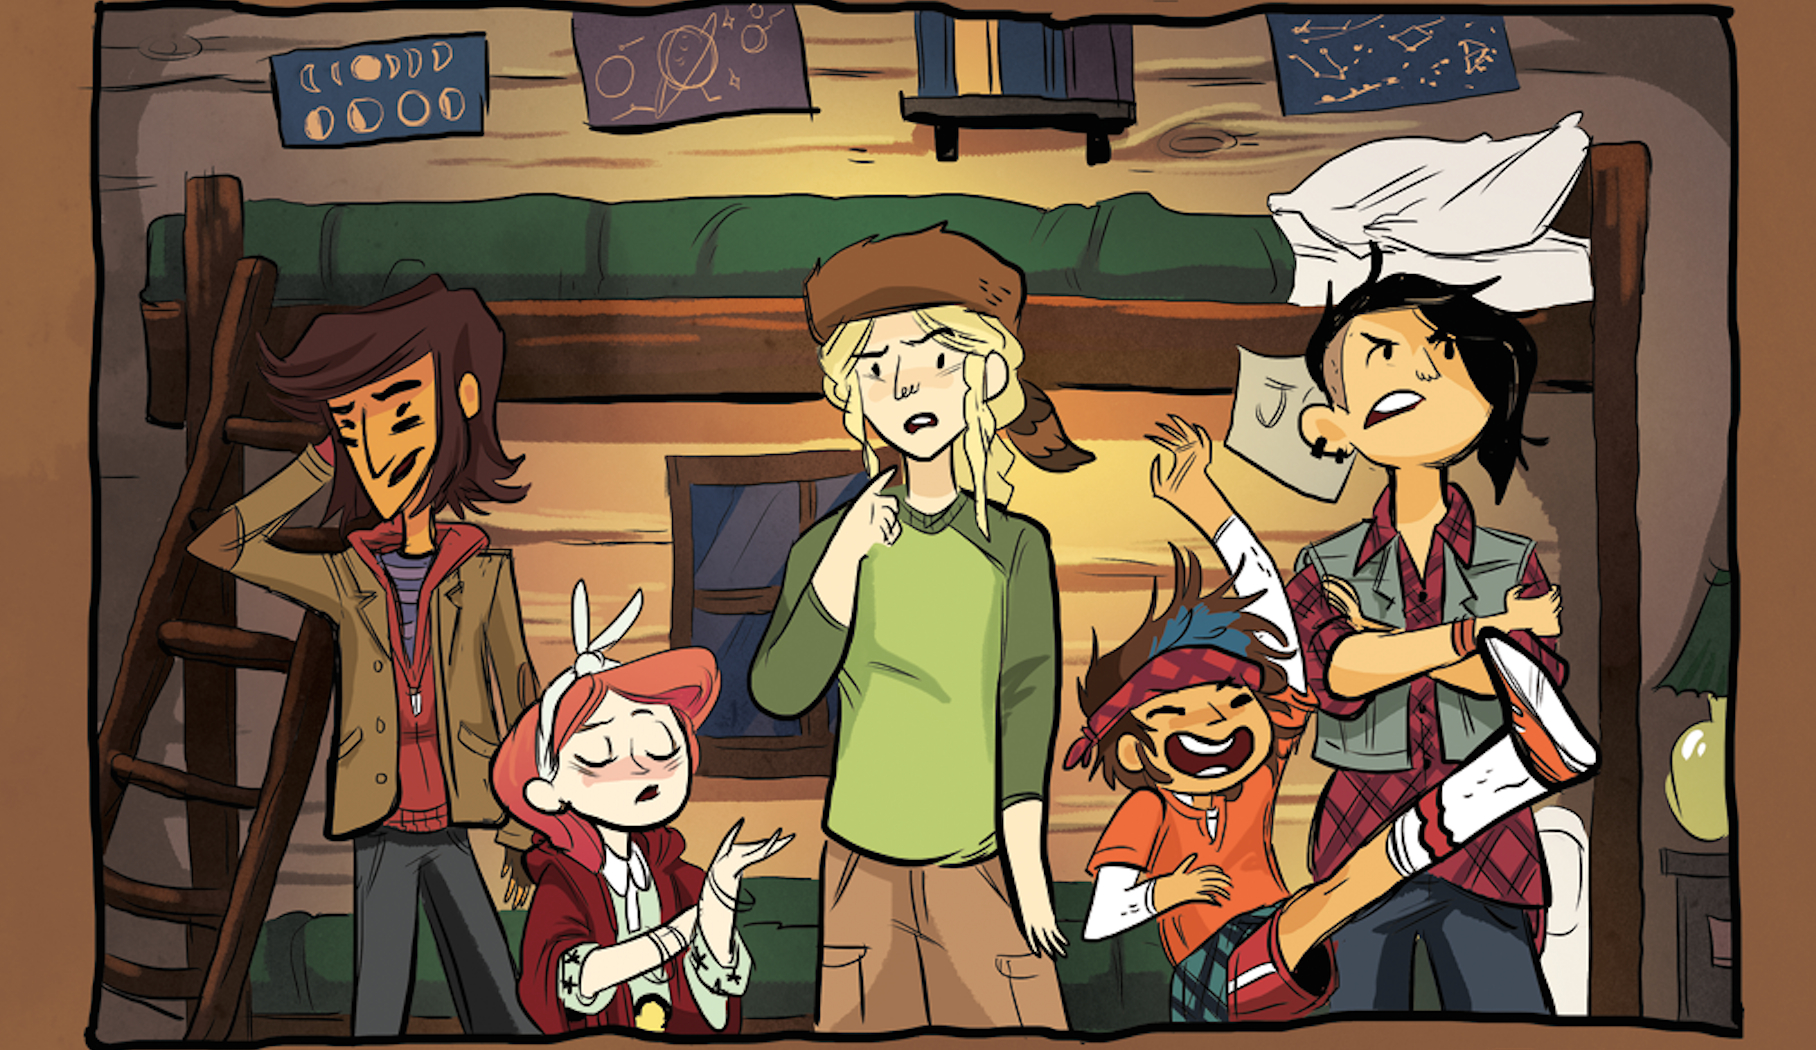 lumberjanes is about to become a major motion picture